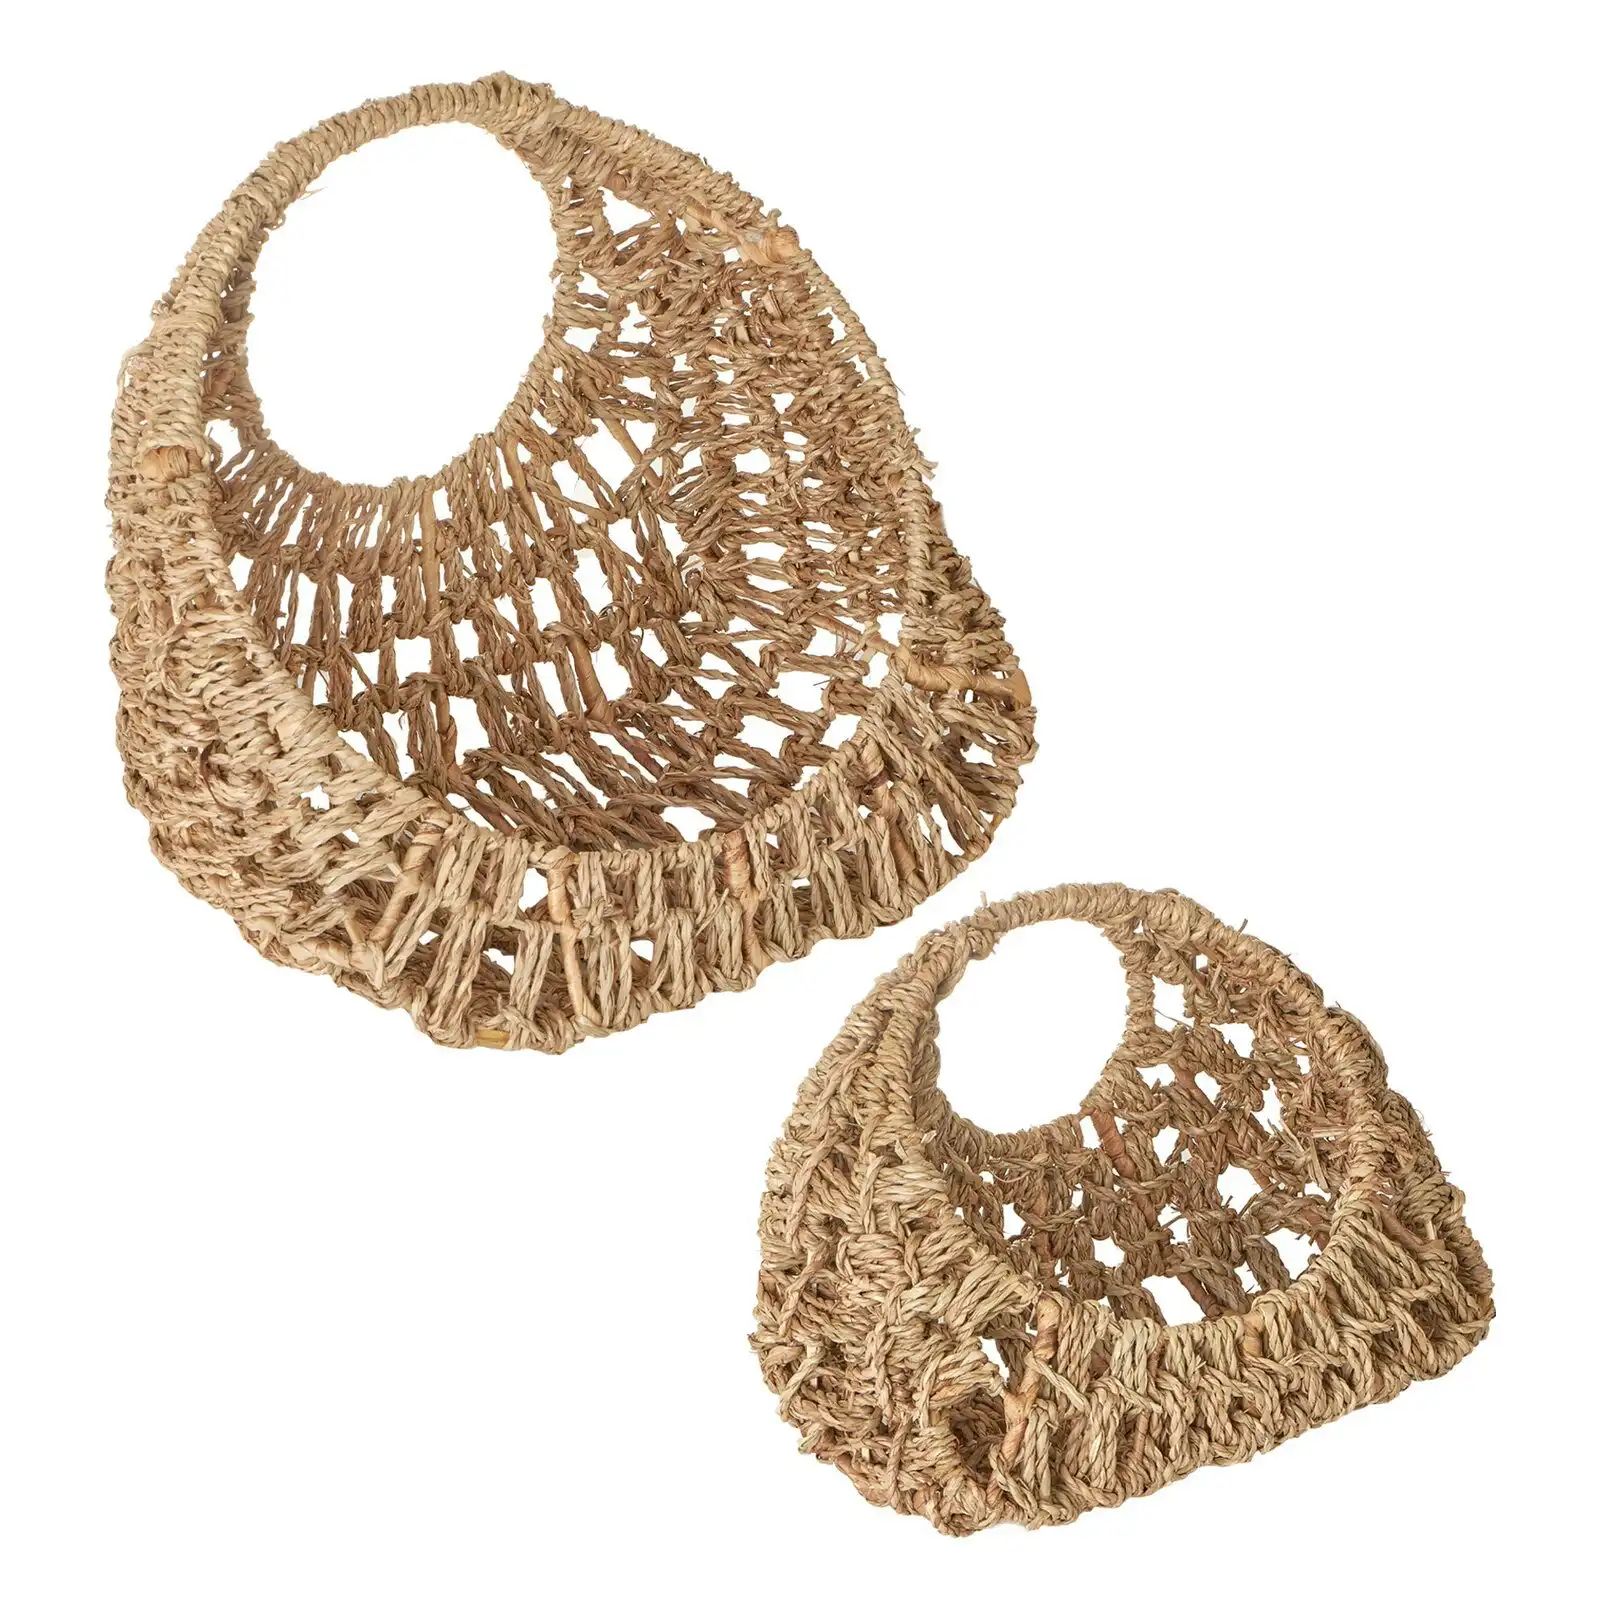 2pc Cooper & Co. Hart Wall Mounted Indoor Woven Fabric Plant Holder/Pot Set